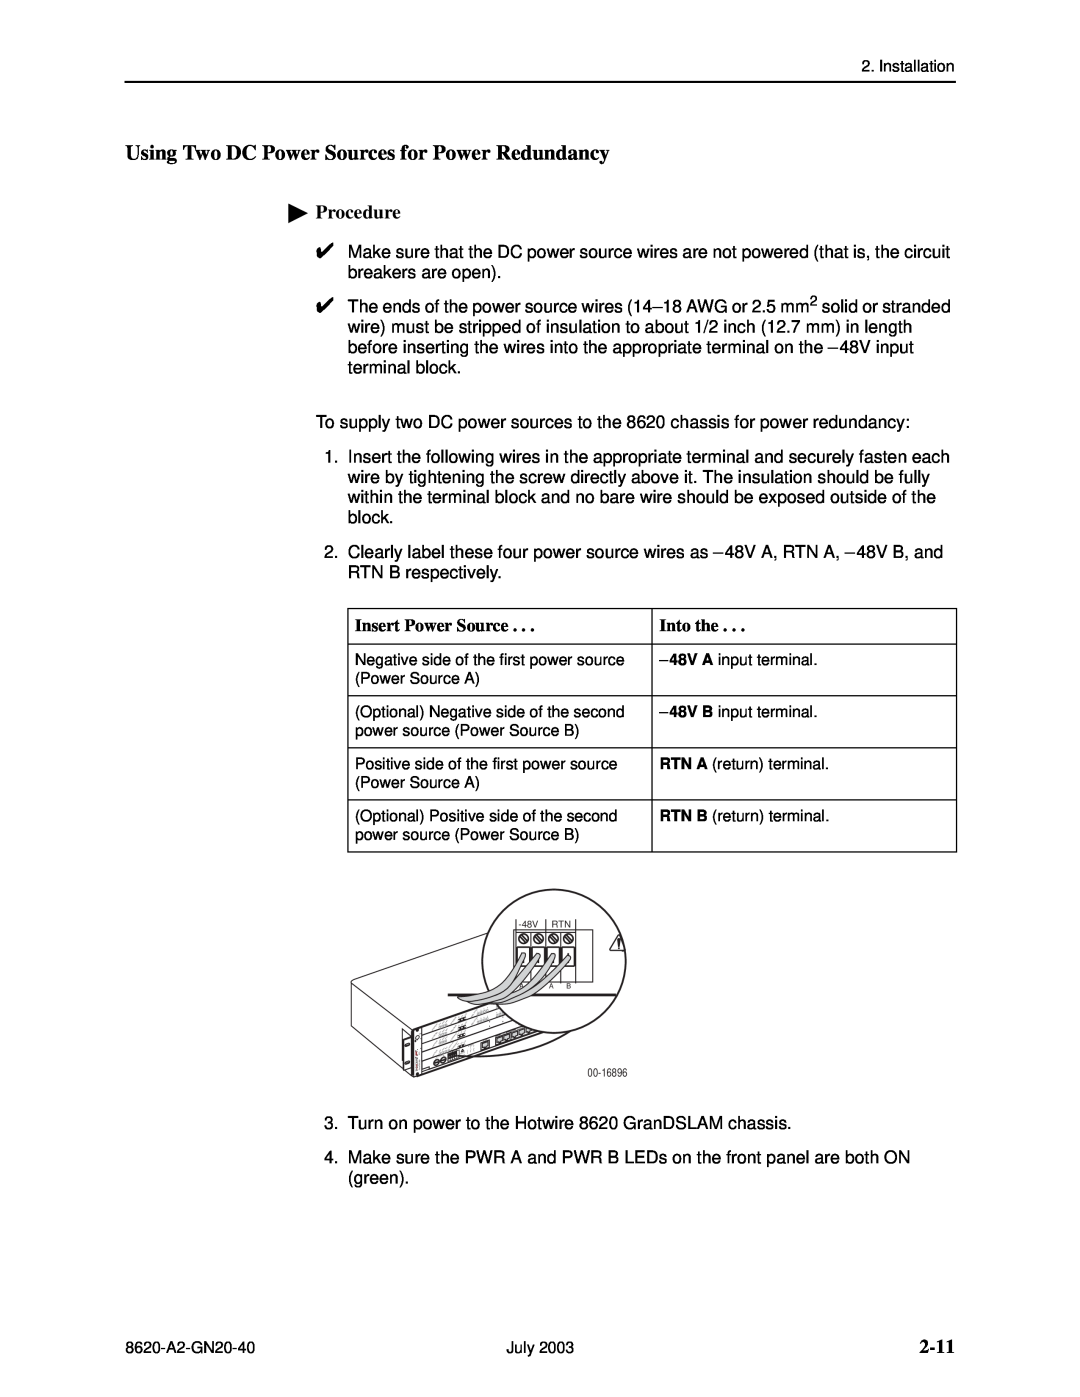 Paradyne Hotwire 8620 GranDSLAM Installation Guide manual Using Two DC Power Sources for Power Redundancy, 2-11, Procedure 